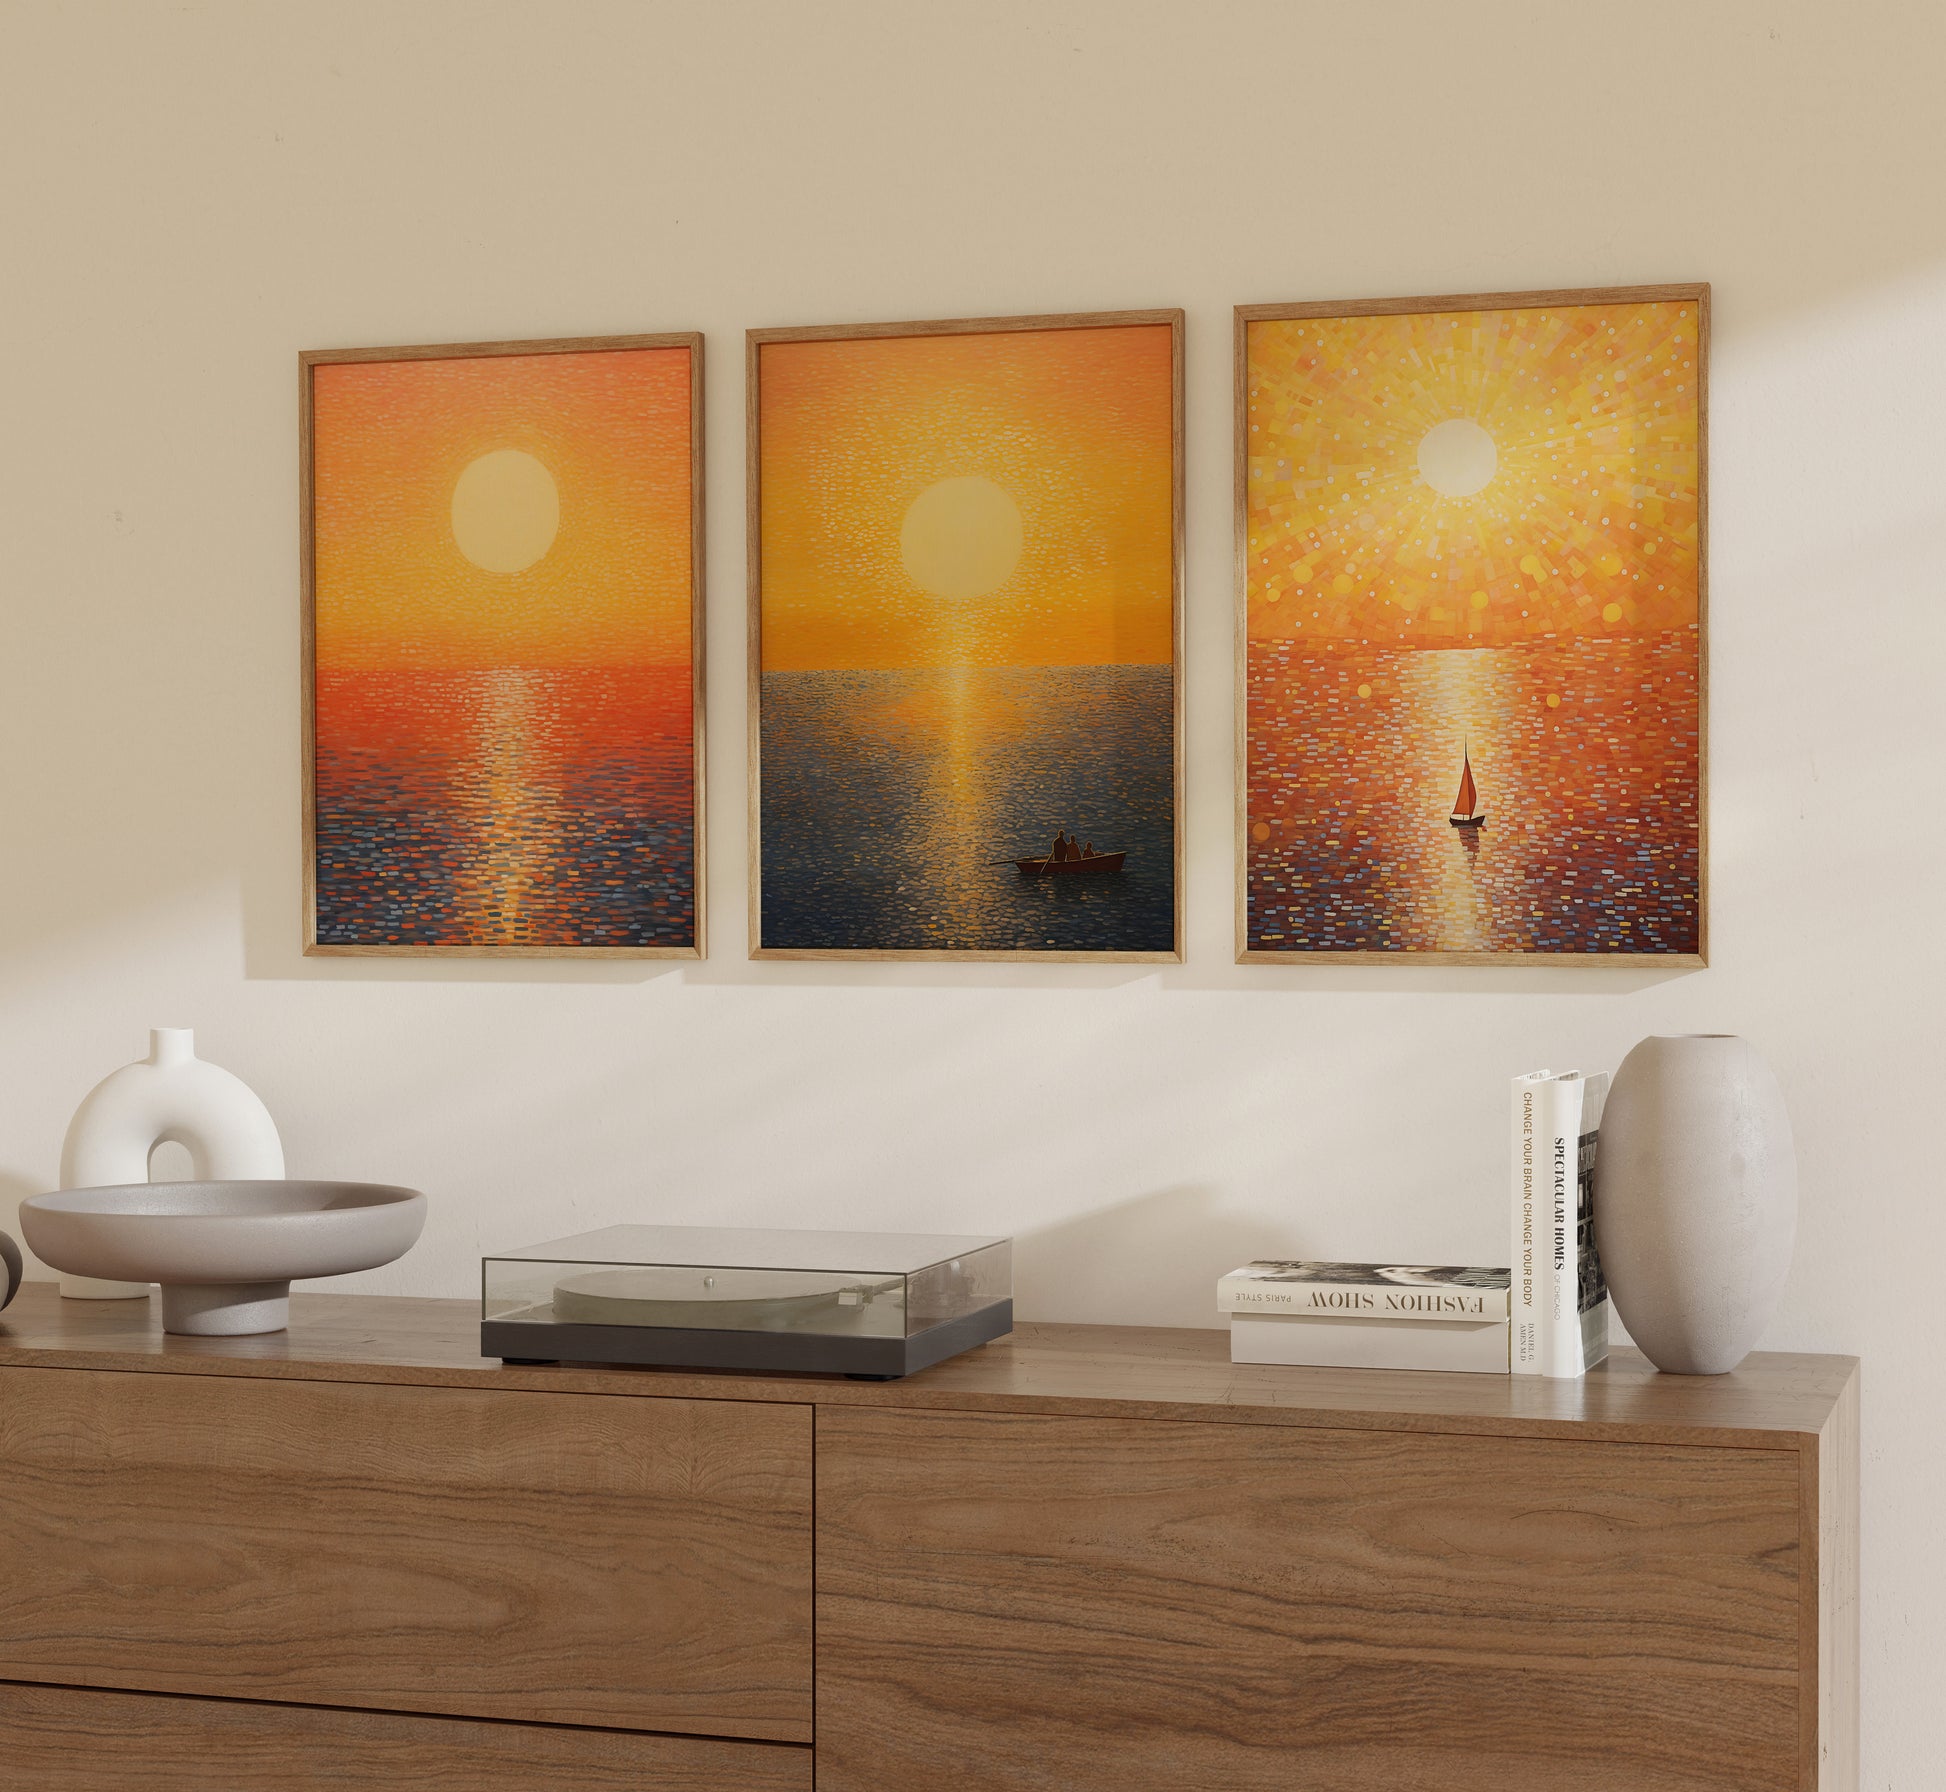 Three framed paintings of sunsets over water, displayed above a wooden sideboard.